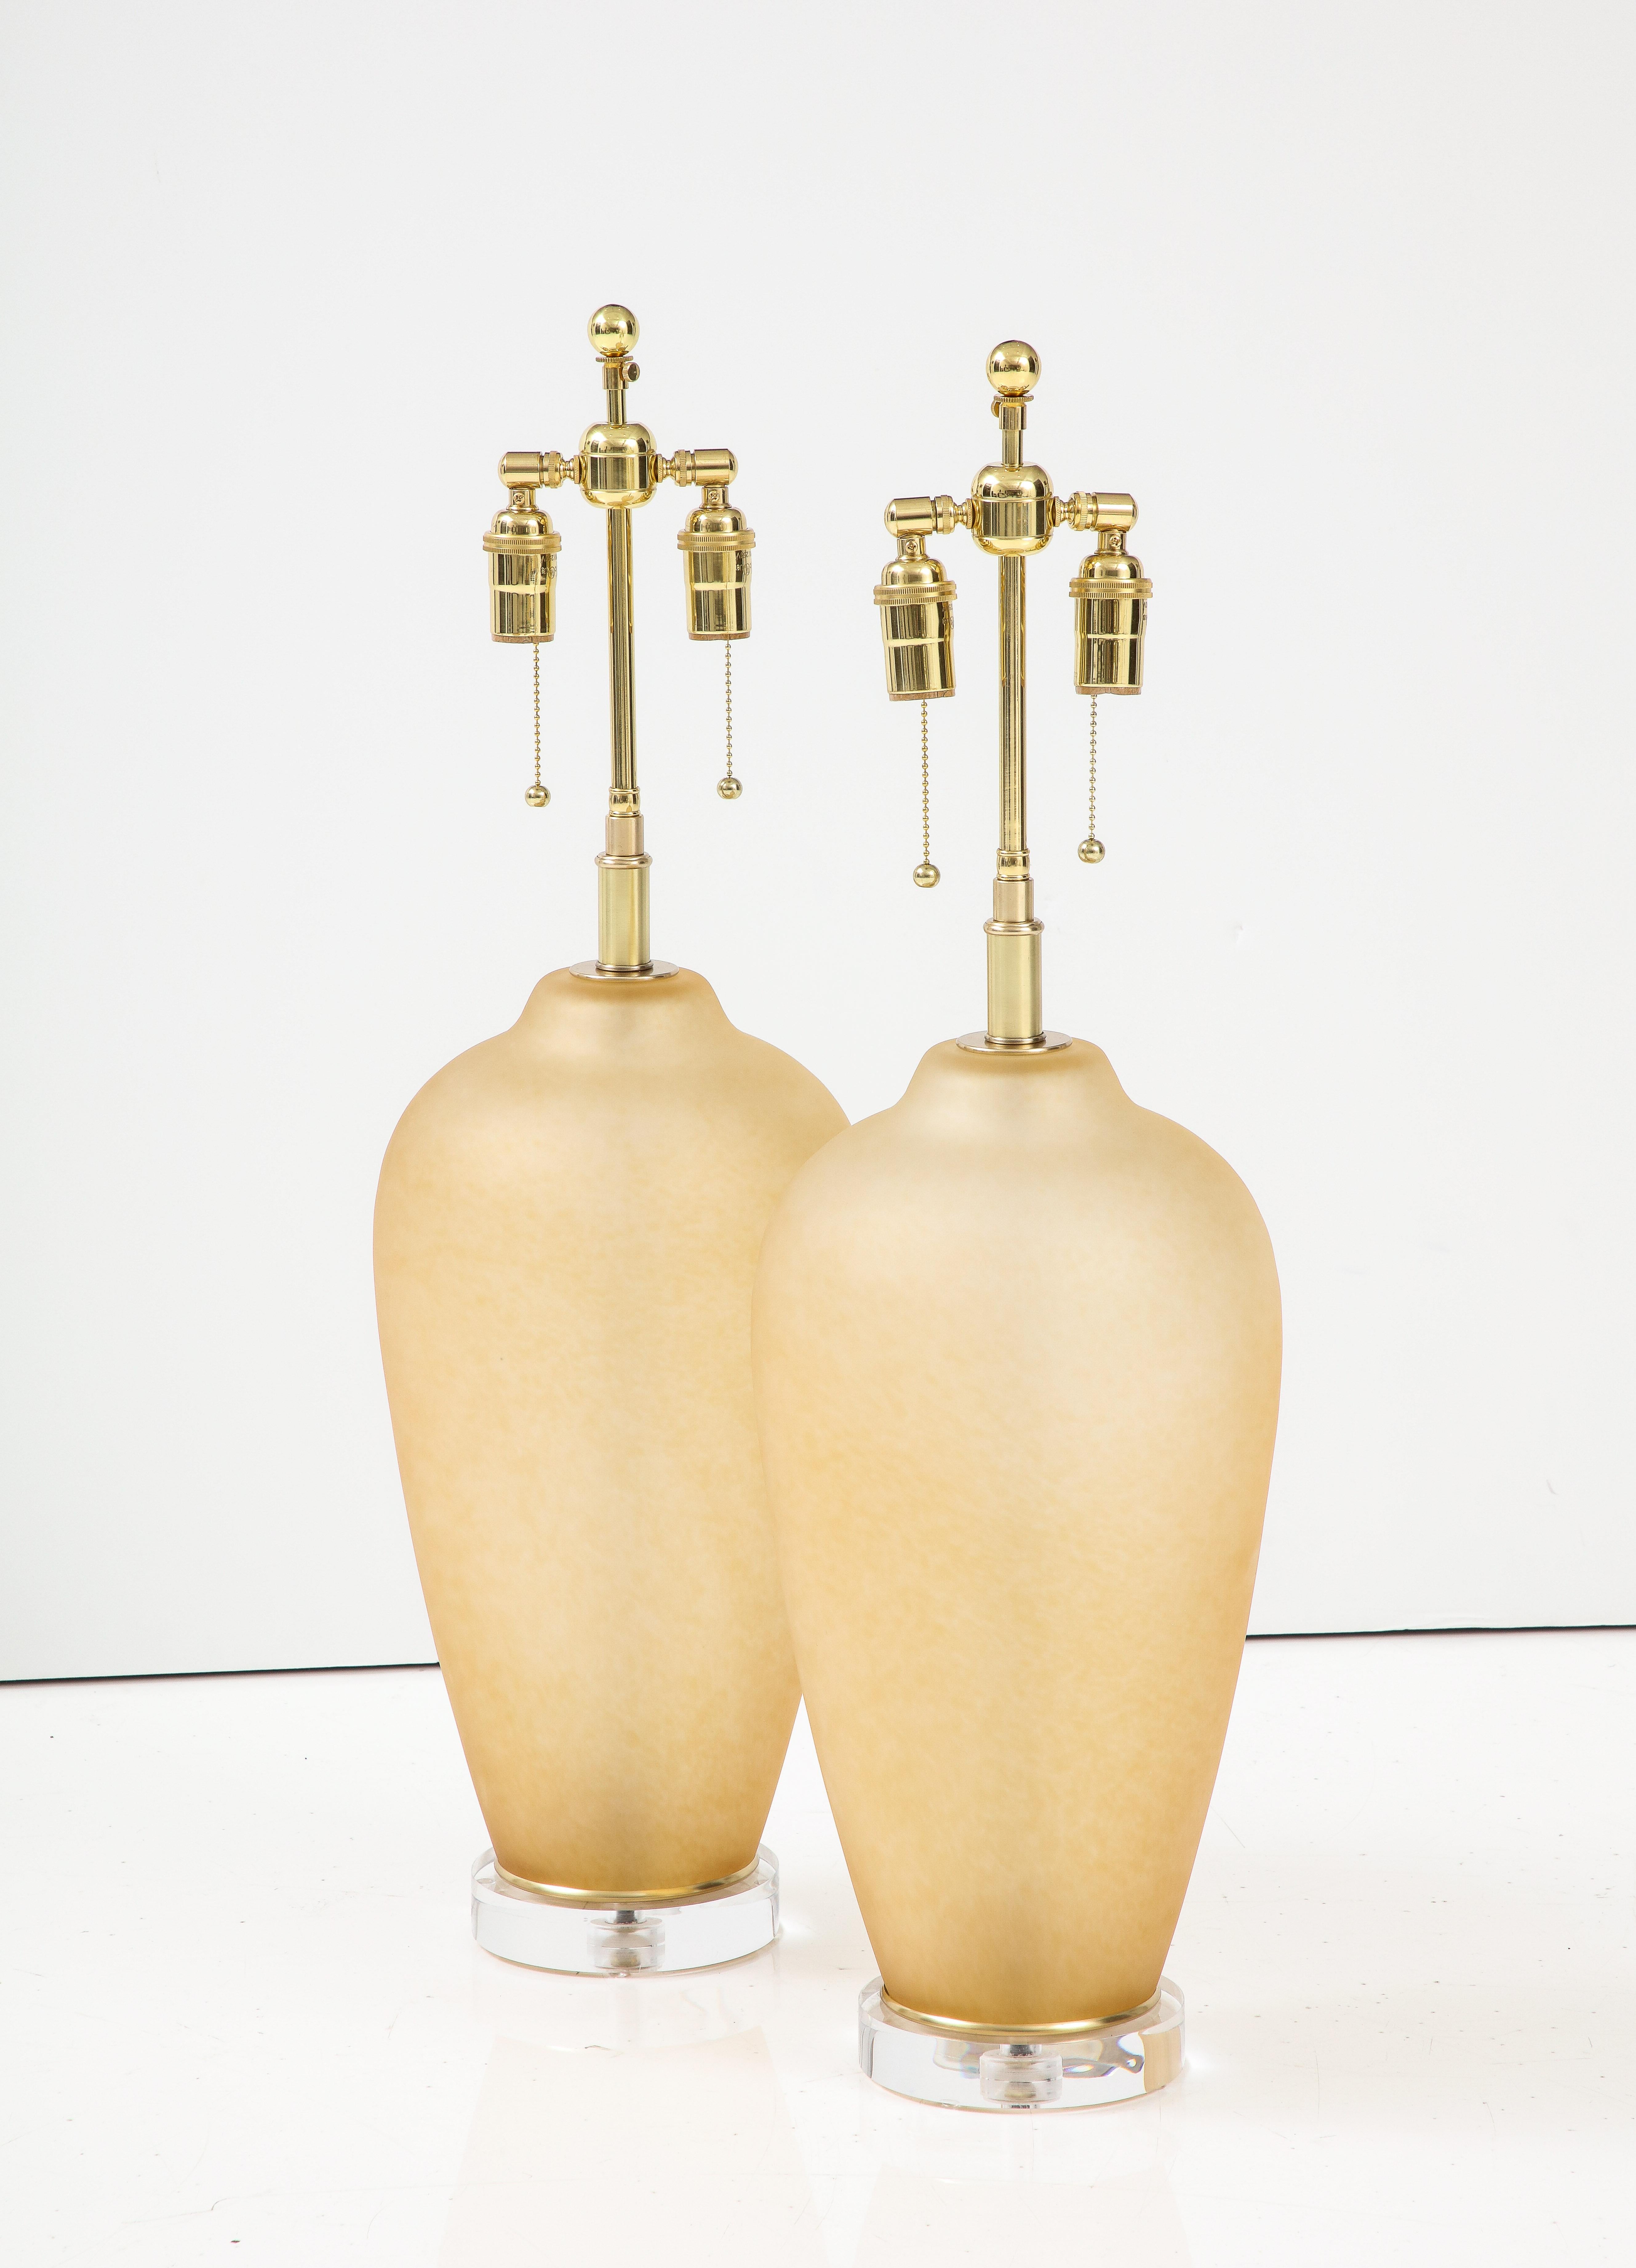 Pair of large Murano glass lamps in a soft Amber color, that are mounted on 
thick lucite bases.
The lamps have been Newly rewired with adjustable polished brass double clusters that take standard size light bulbs.
The height to the top of the glass